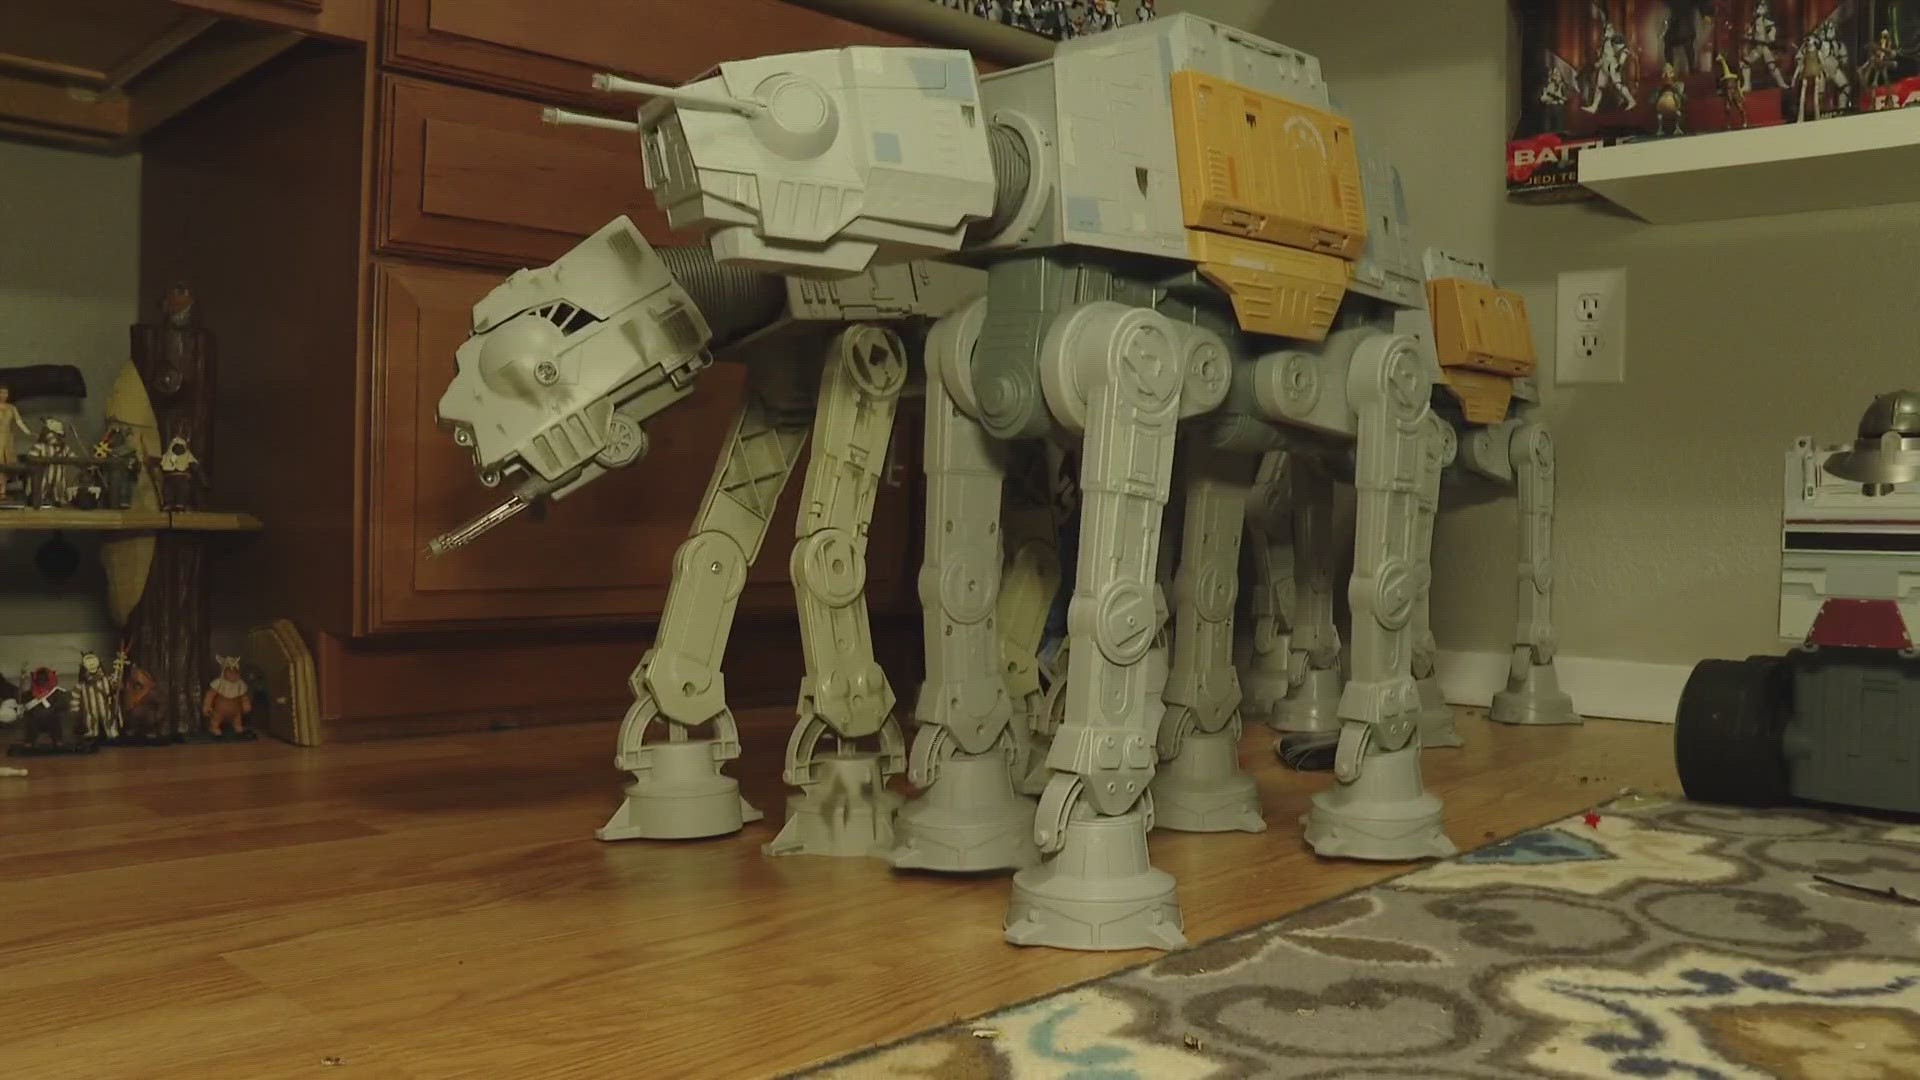 Since 2018, Jack Matson has collected over 3,000 pieces of Star Wars memorabilia.